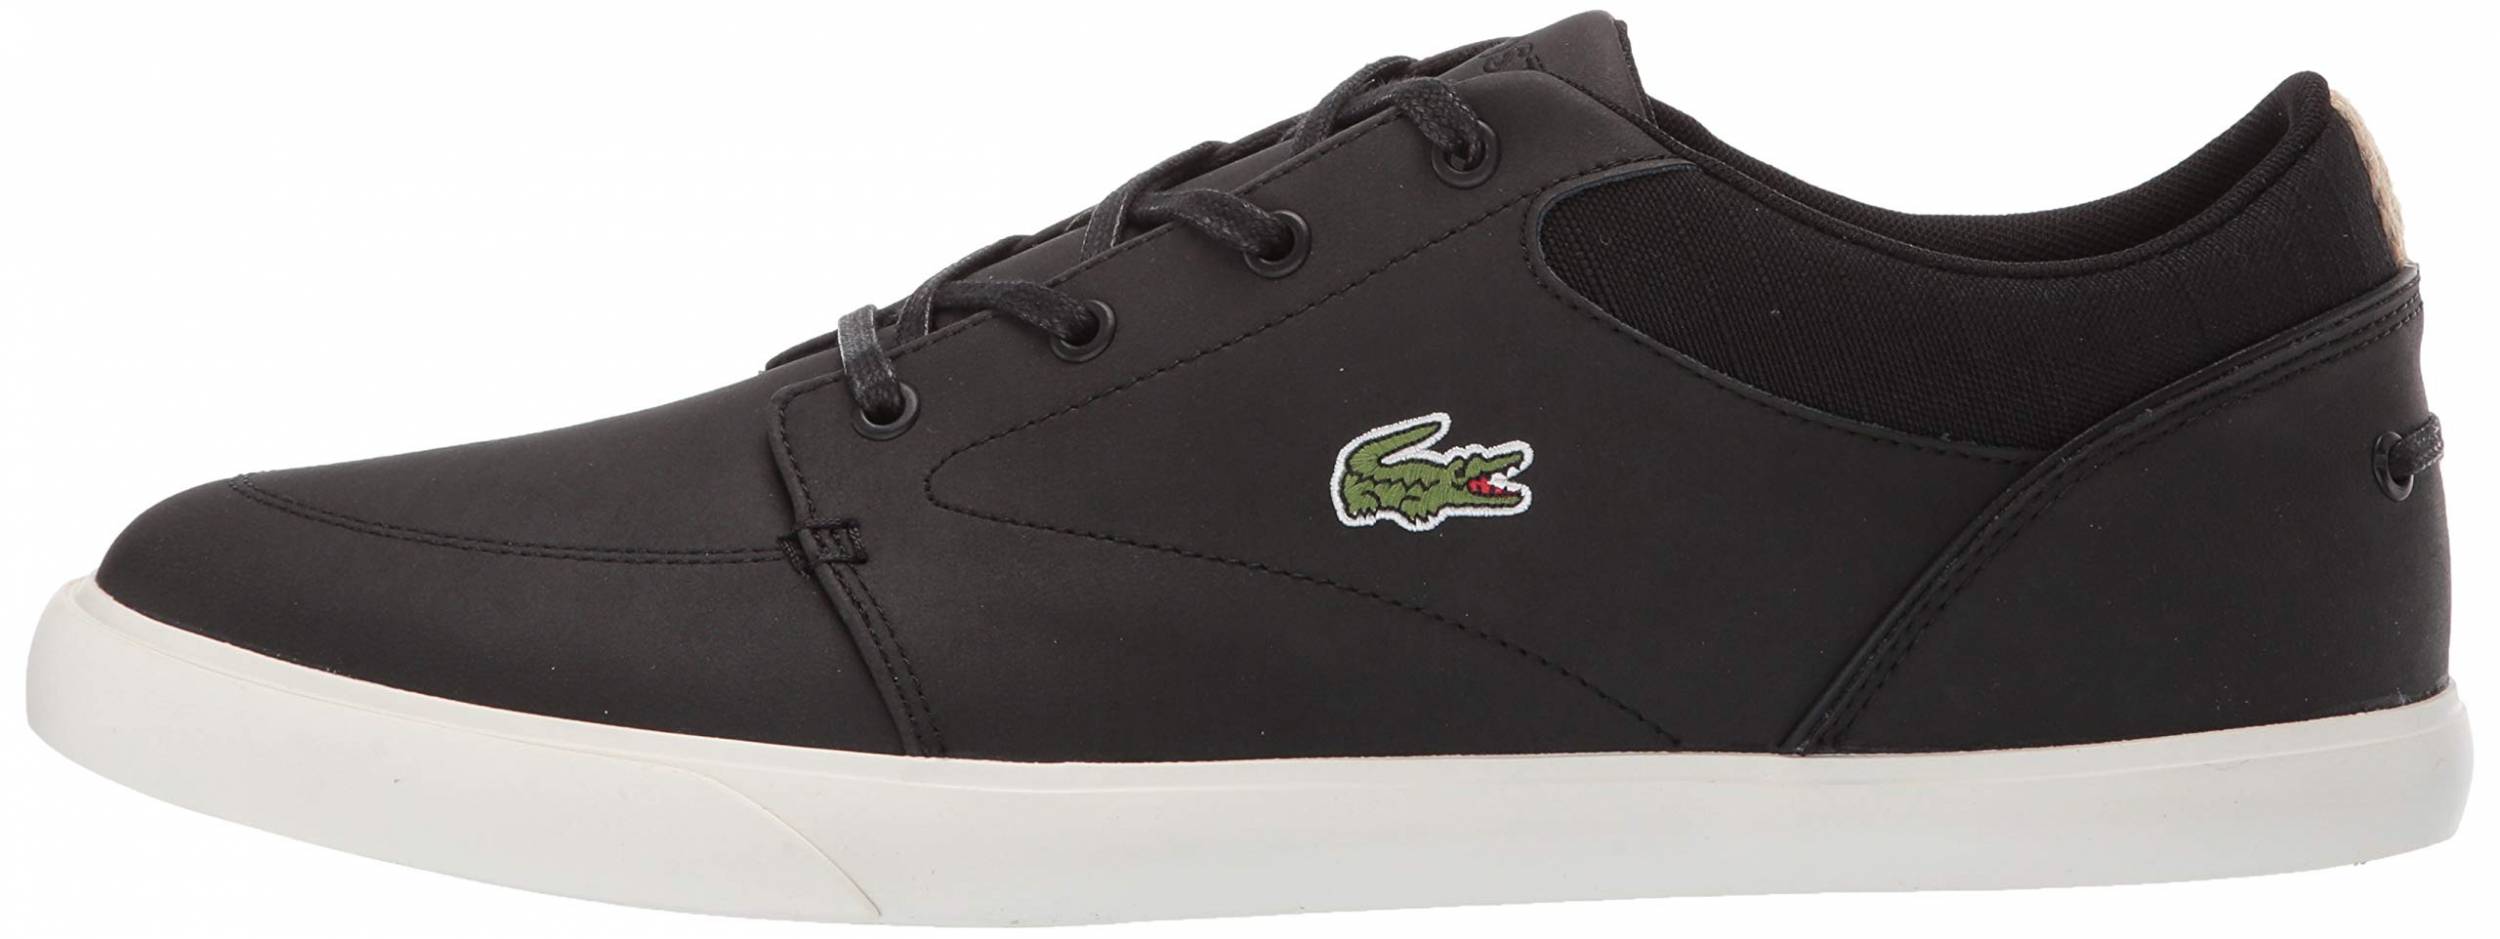 all black lacoste trainers